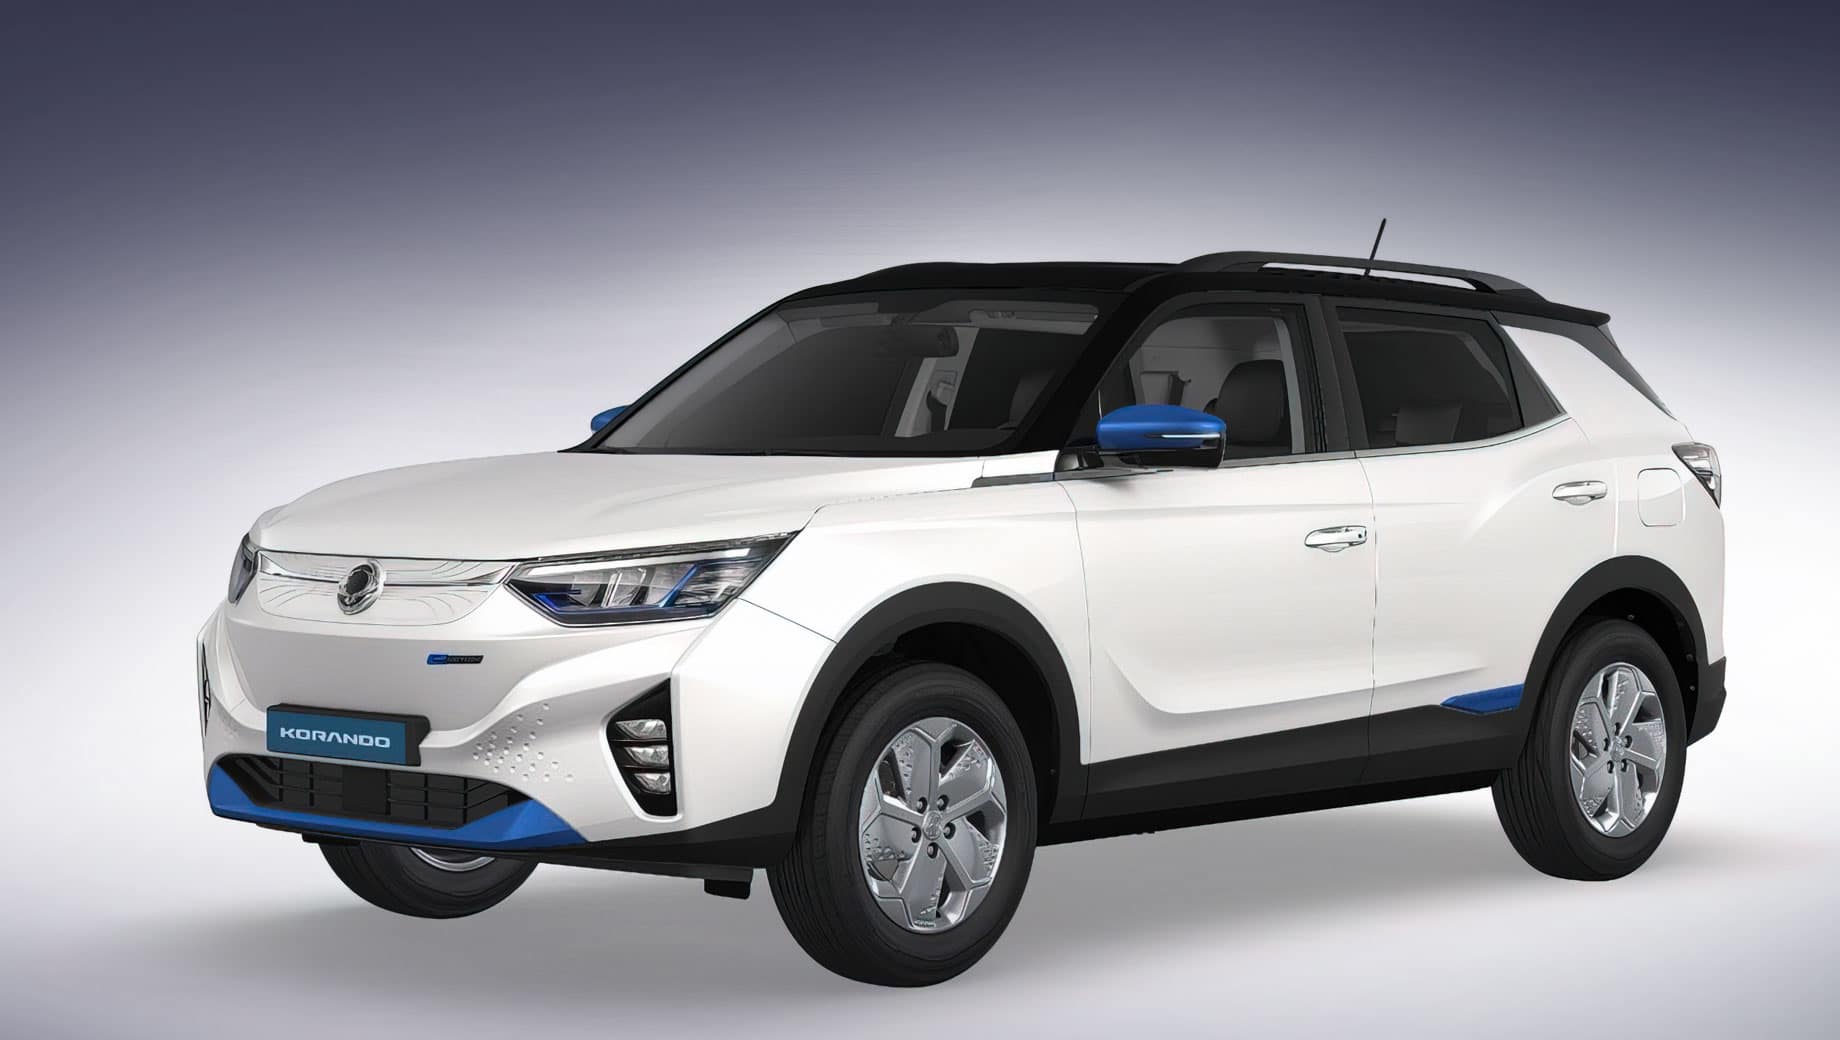 The SsangYong Korando e-Motion, ready for its arrival in Europe